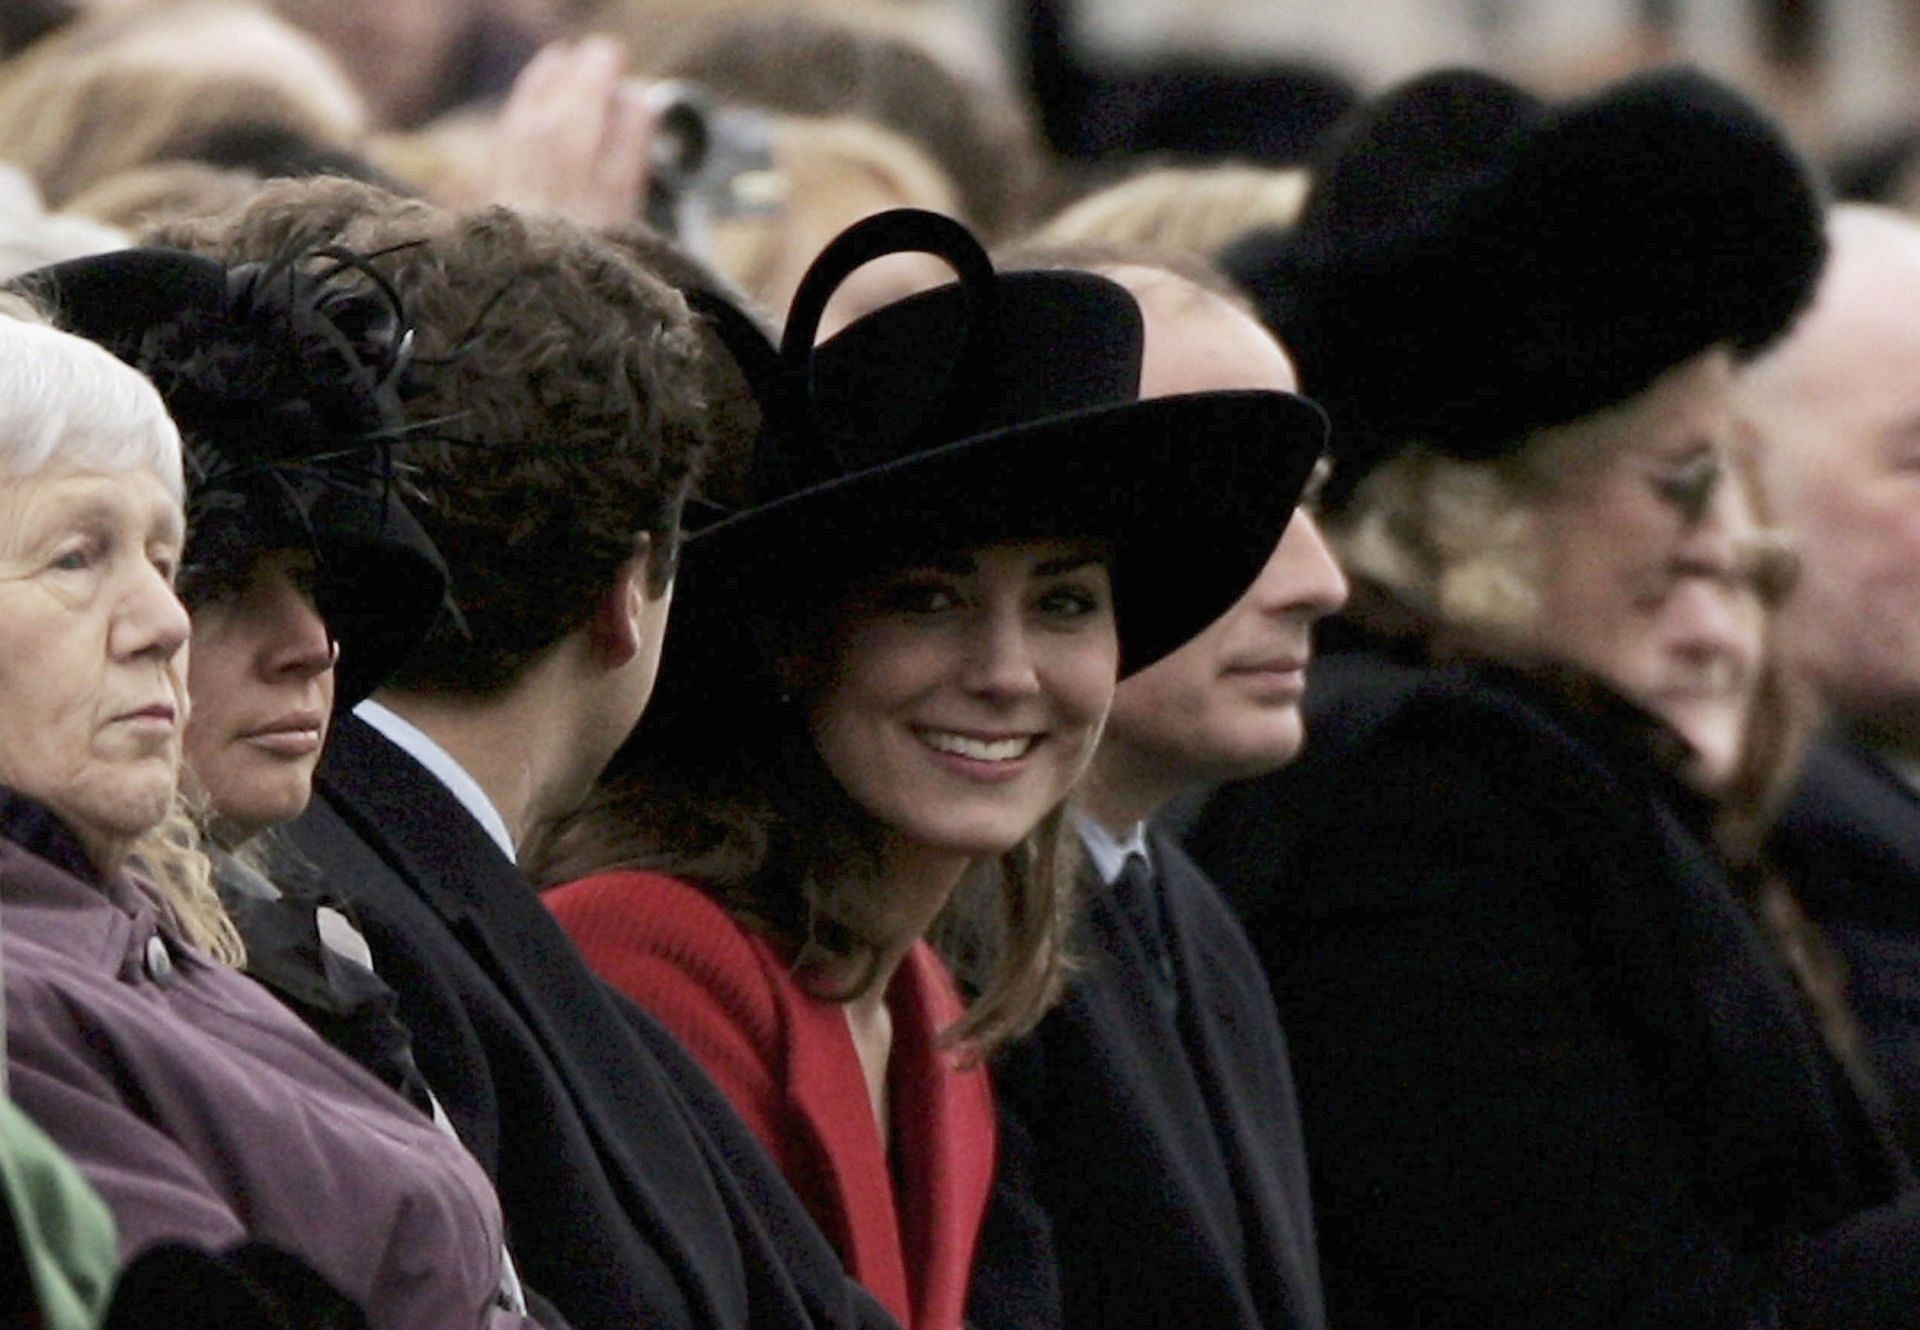 HRH Prince William&#039;s girlfriend Kate Middleton (C) looks round while watching William take part in The Sovereign&#039;s Parade at The Royal Military Academy Sandhurst in 2006 (Source: Getty)